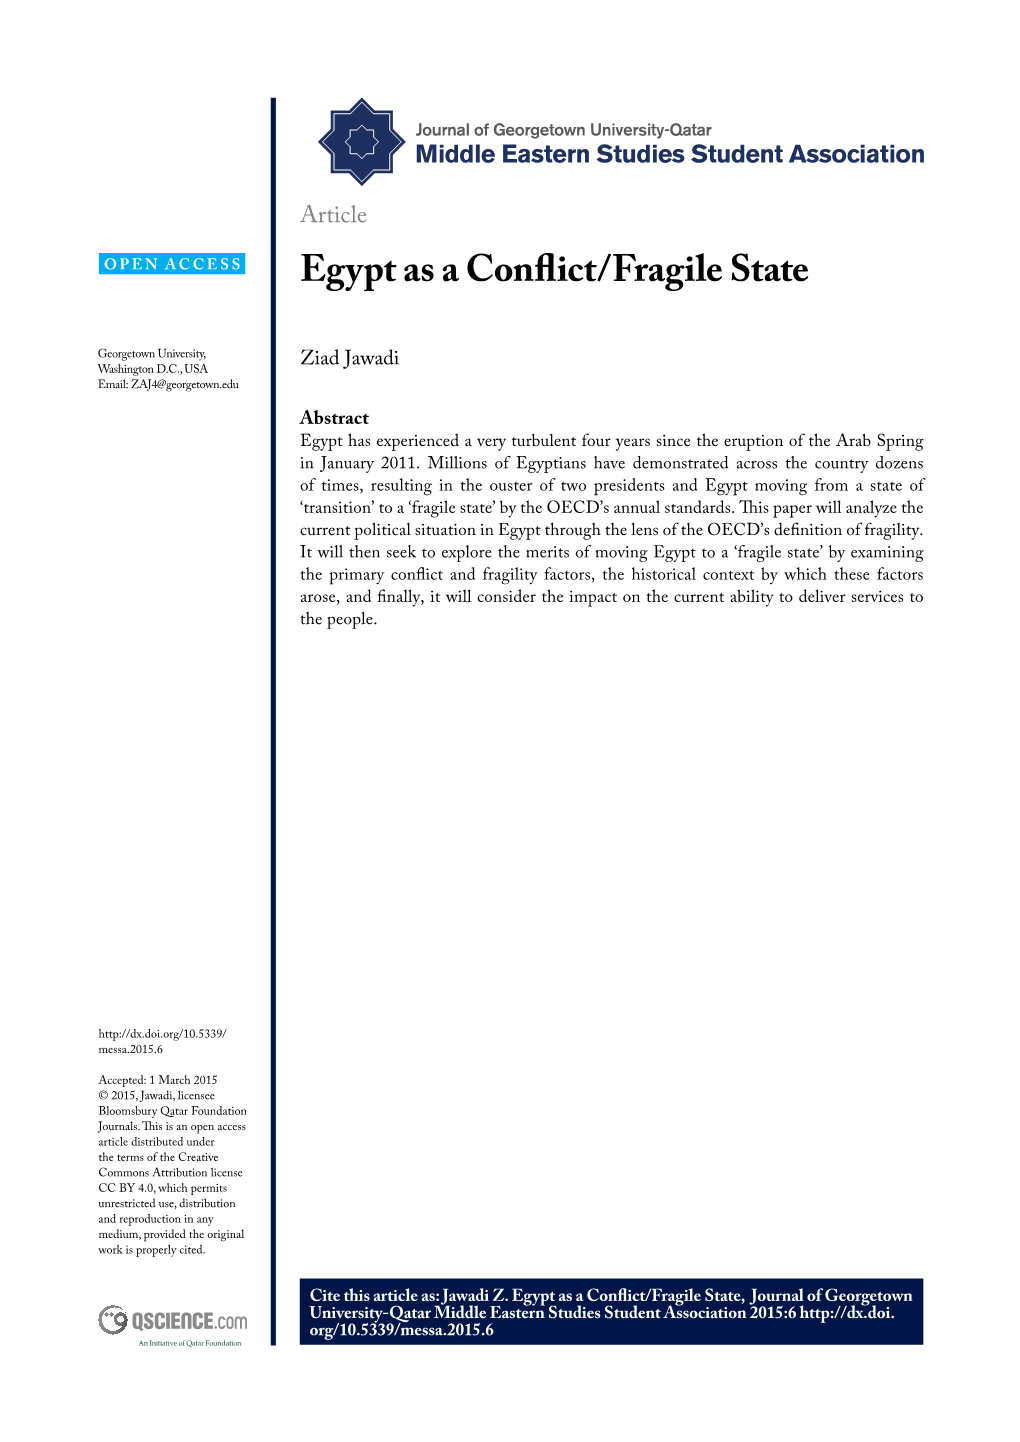 Egypt As a Conflict/Fragile State